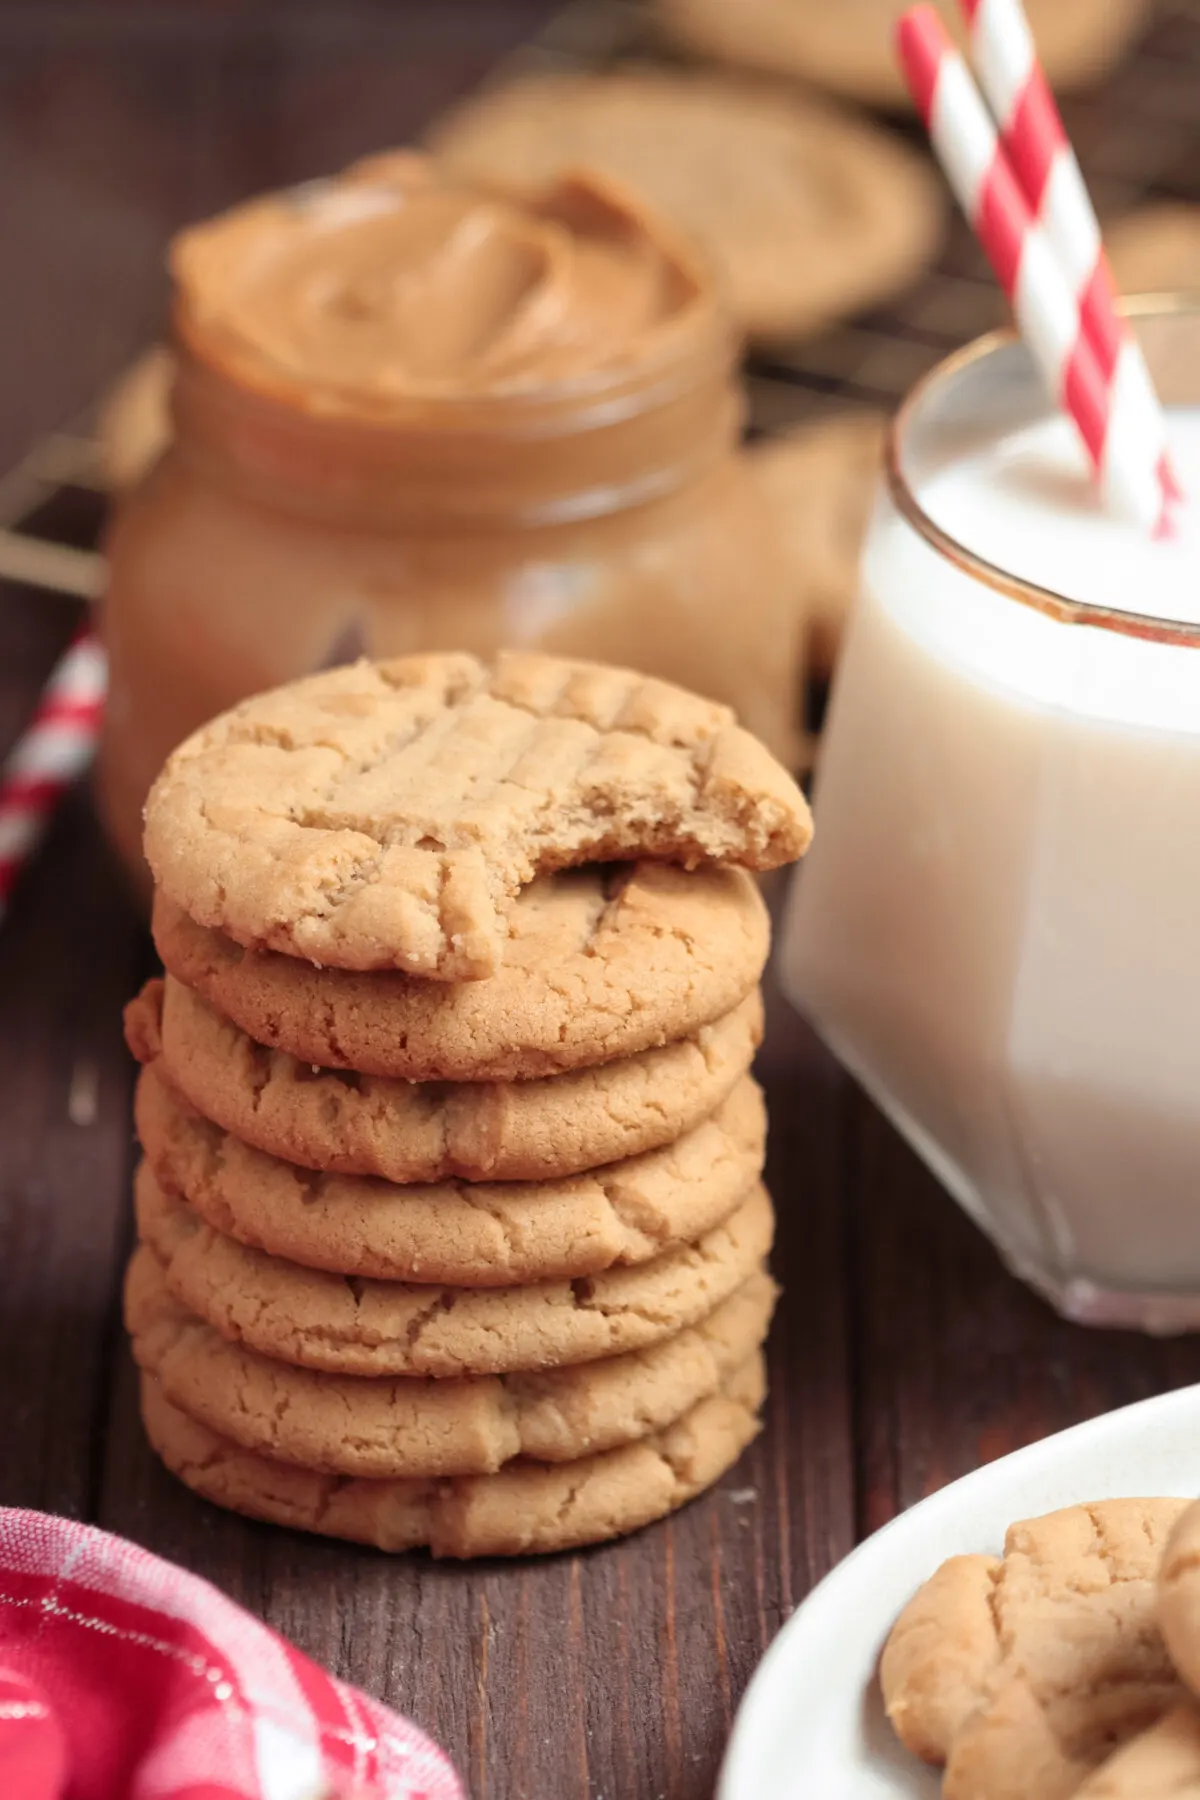 Craving some delicious peanut butter cookies? These classic cookies are crispy on the outside, and soft and chewy on the inside.